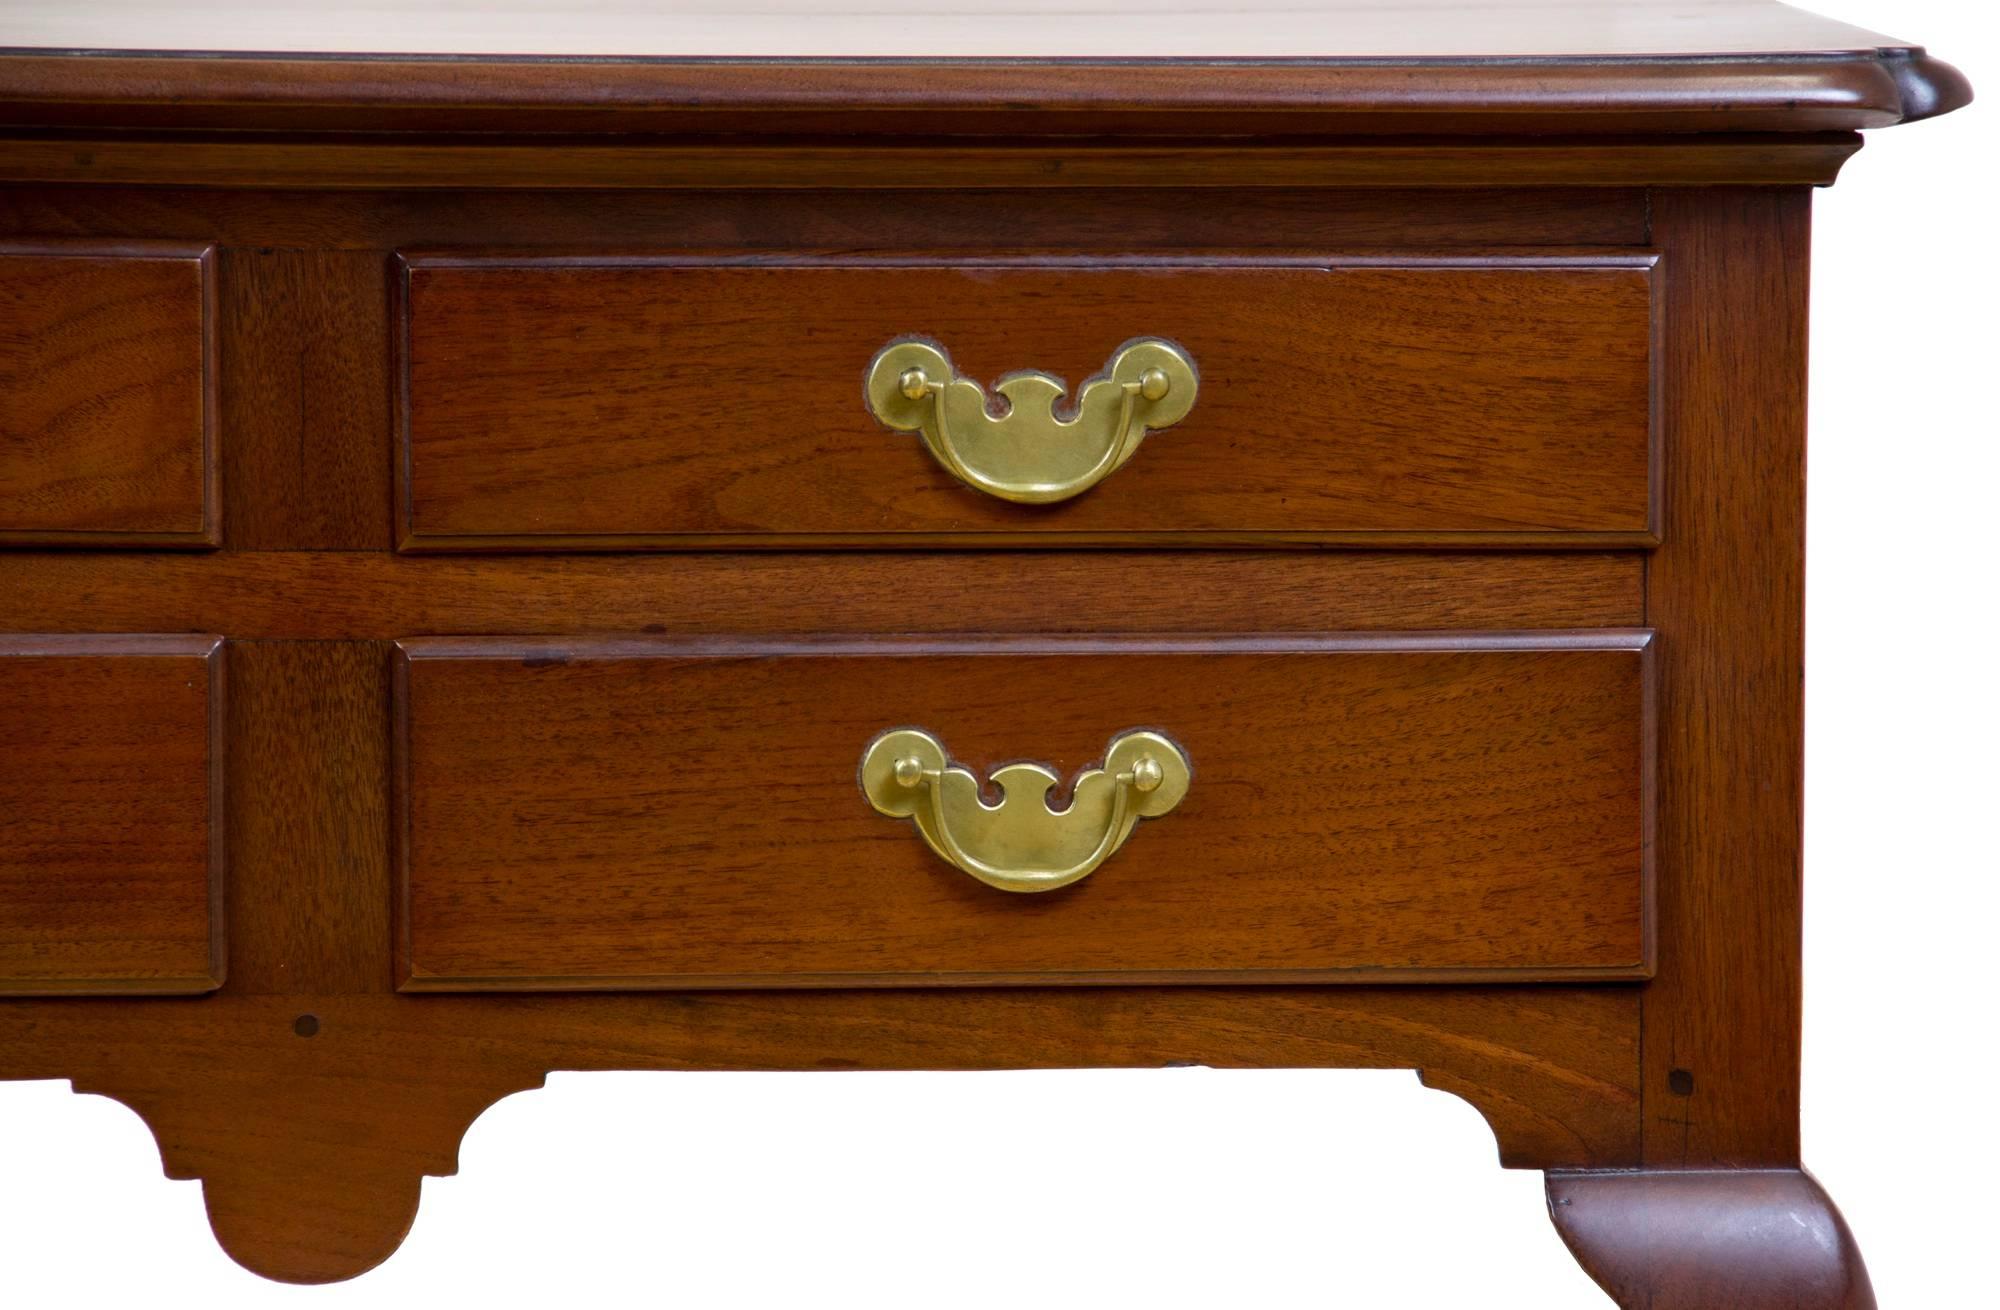 Queen Anne Lowboy/ Dressing Table, Delaware River Valley, PA or NJ, circa 1750 For Sale 1